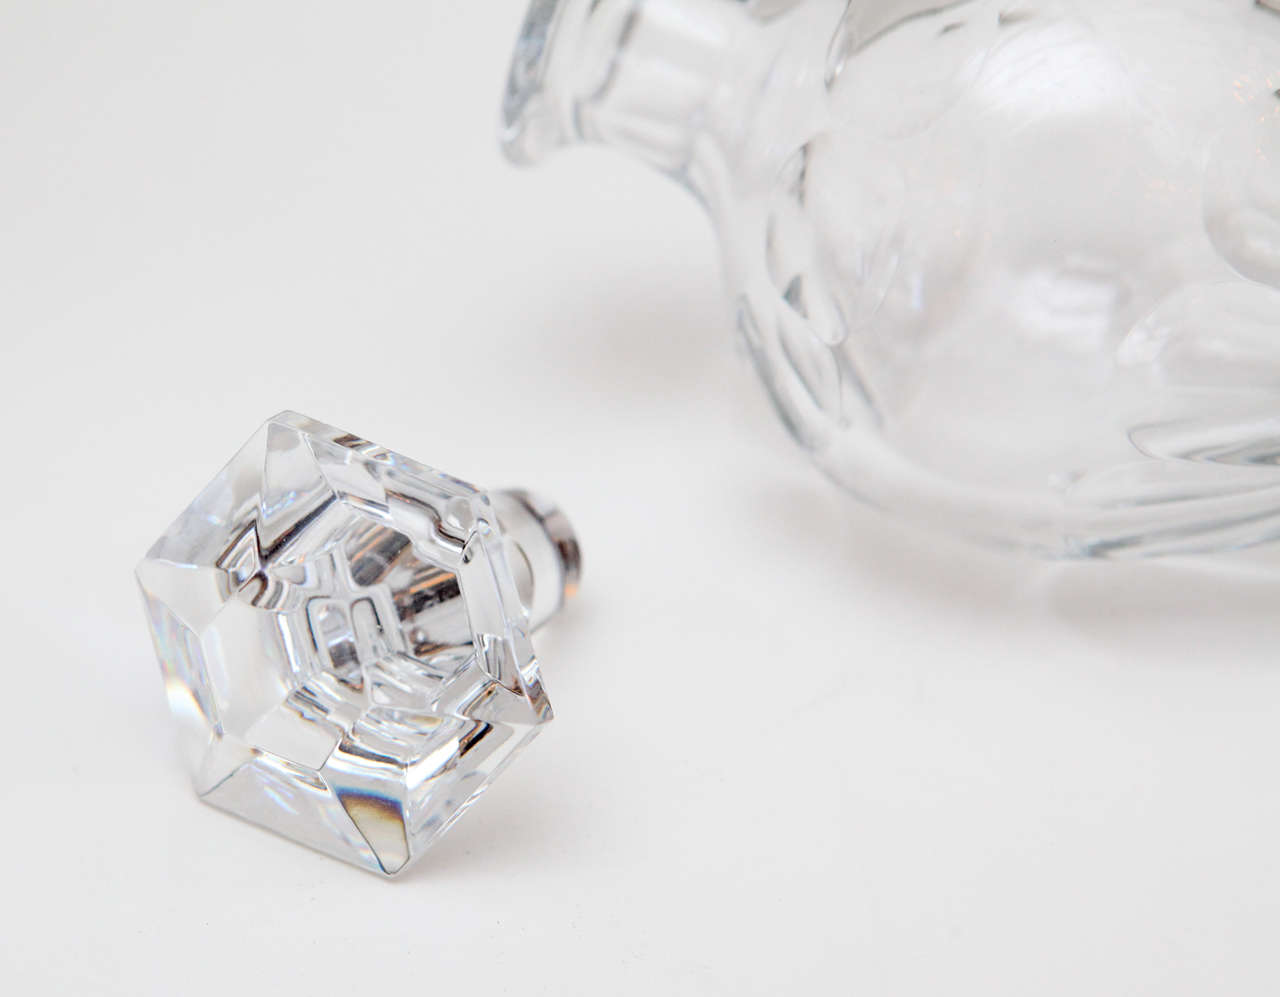 Crystal Antique Baccarat Decanters